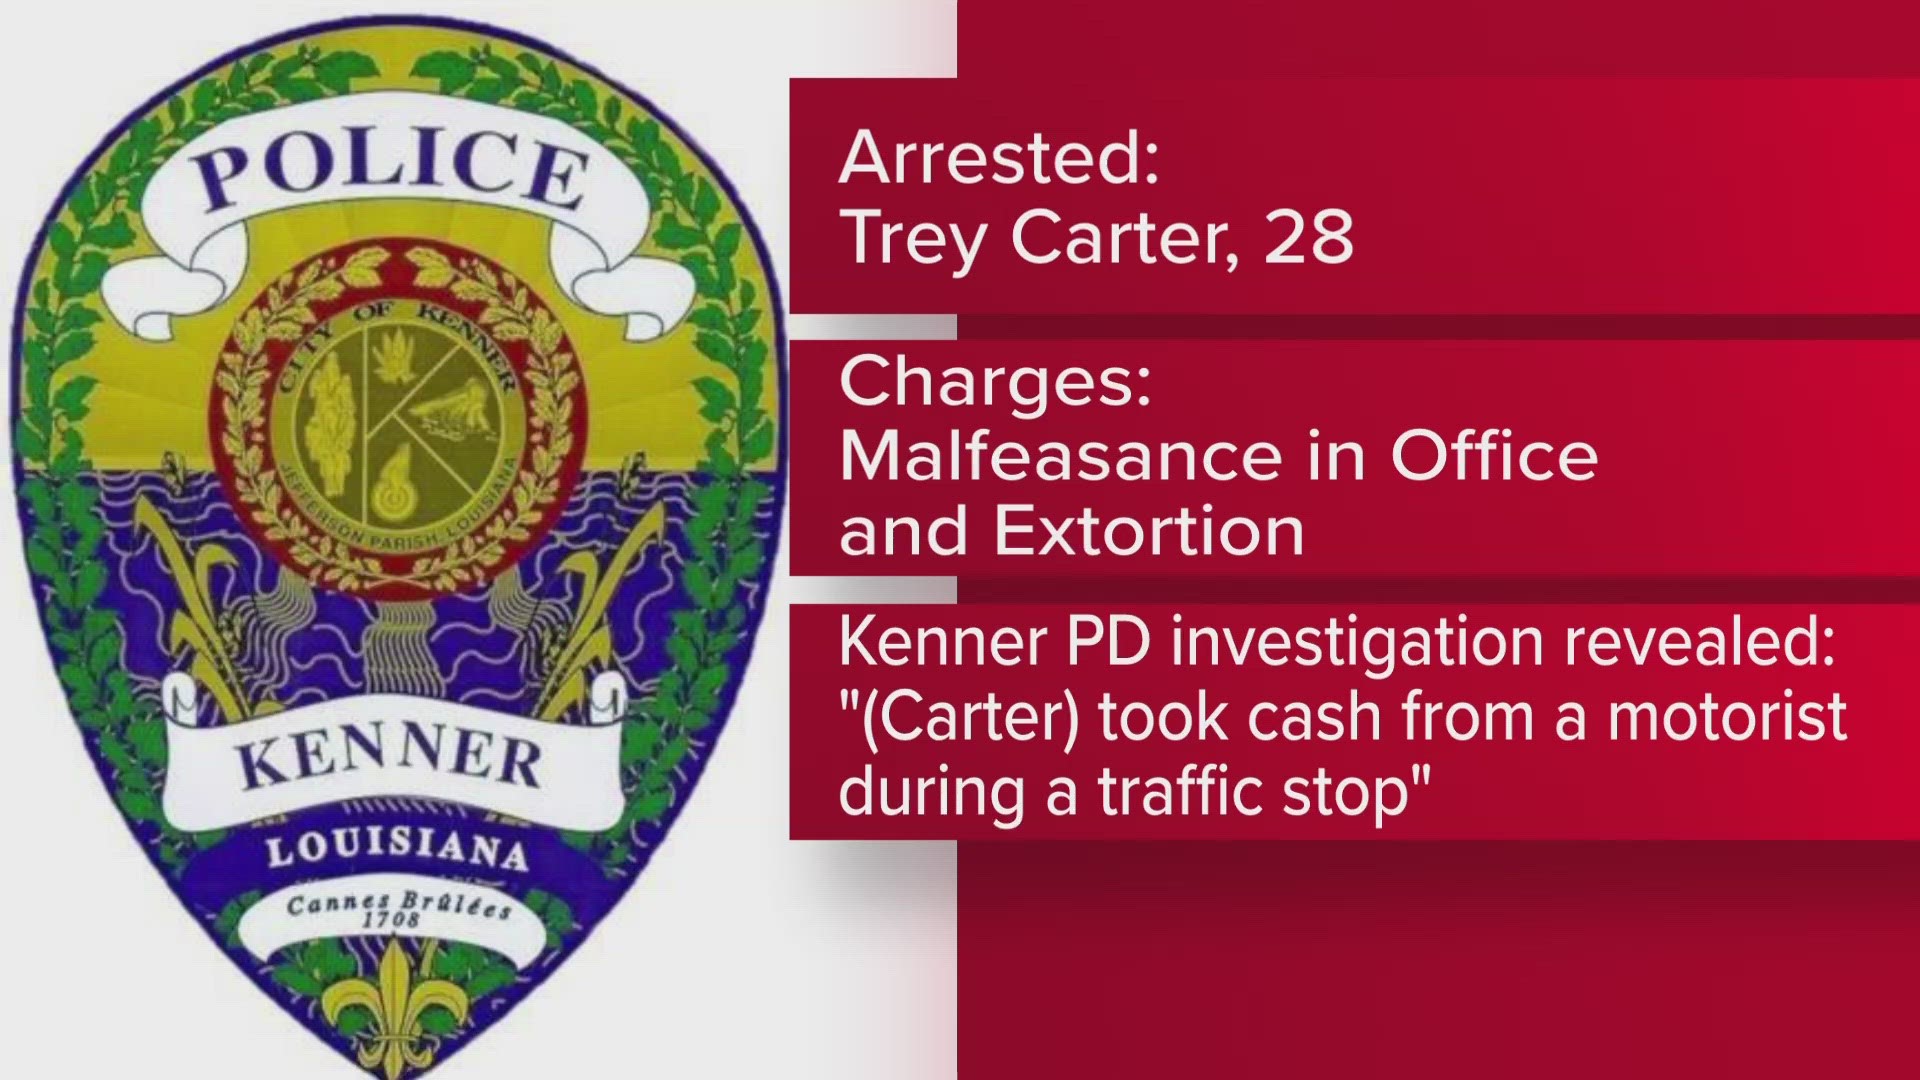 Kenner PD officer arrested for taking cash from a motorist during a traffic stop.